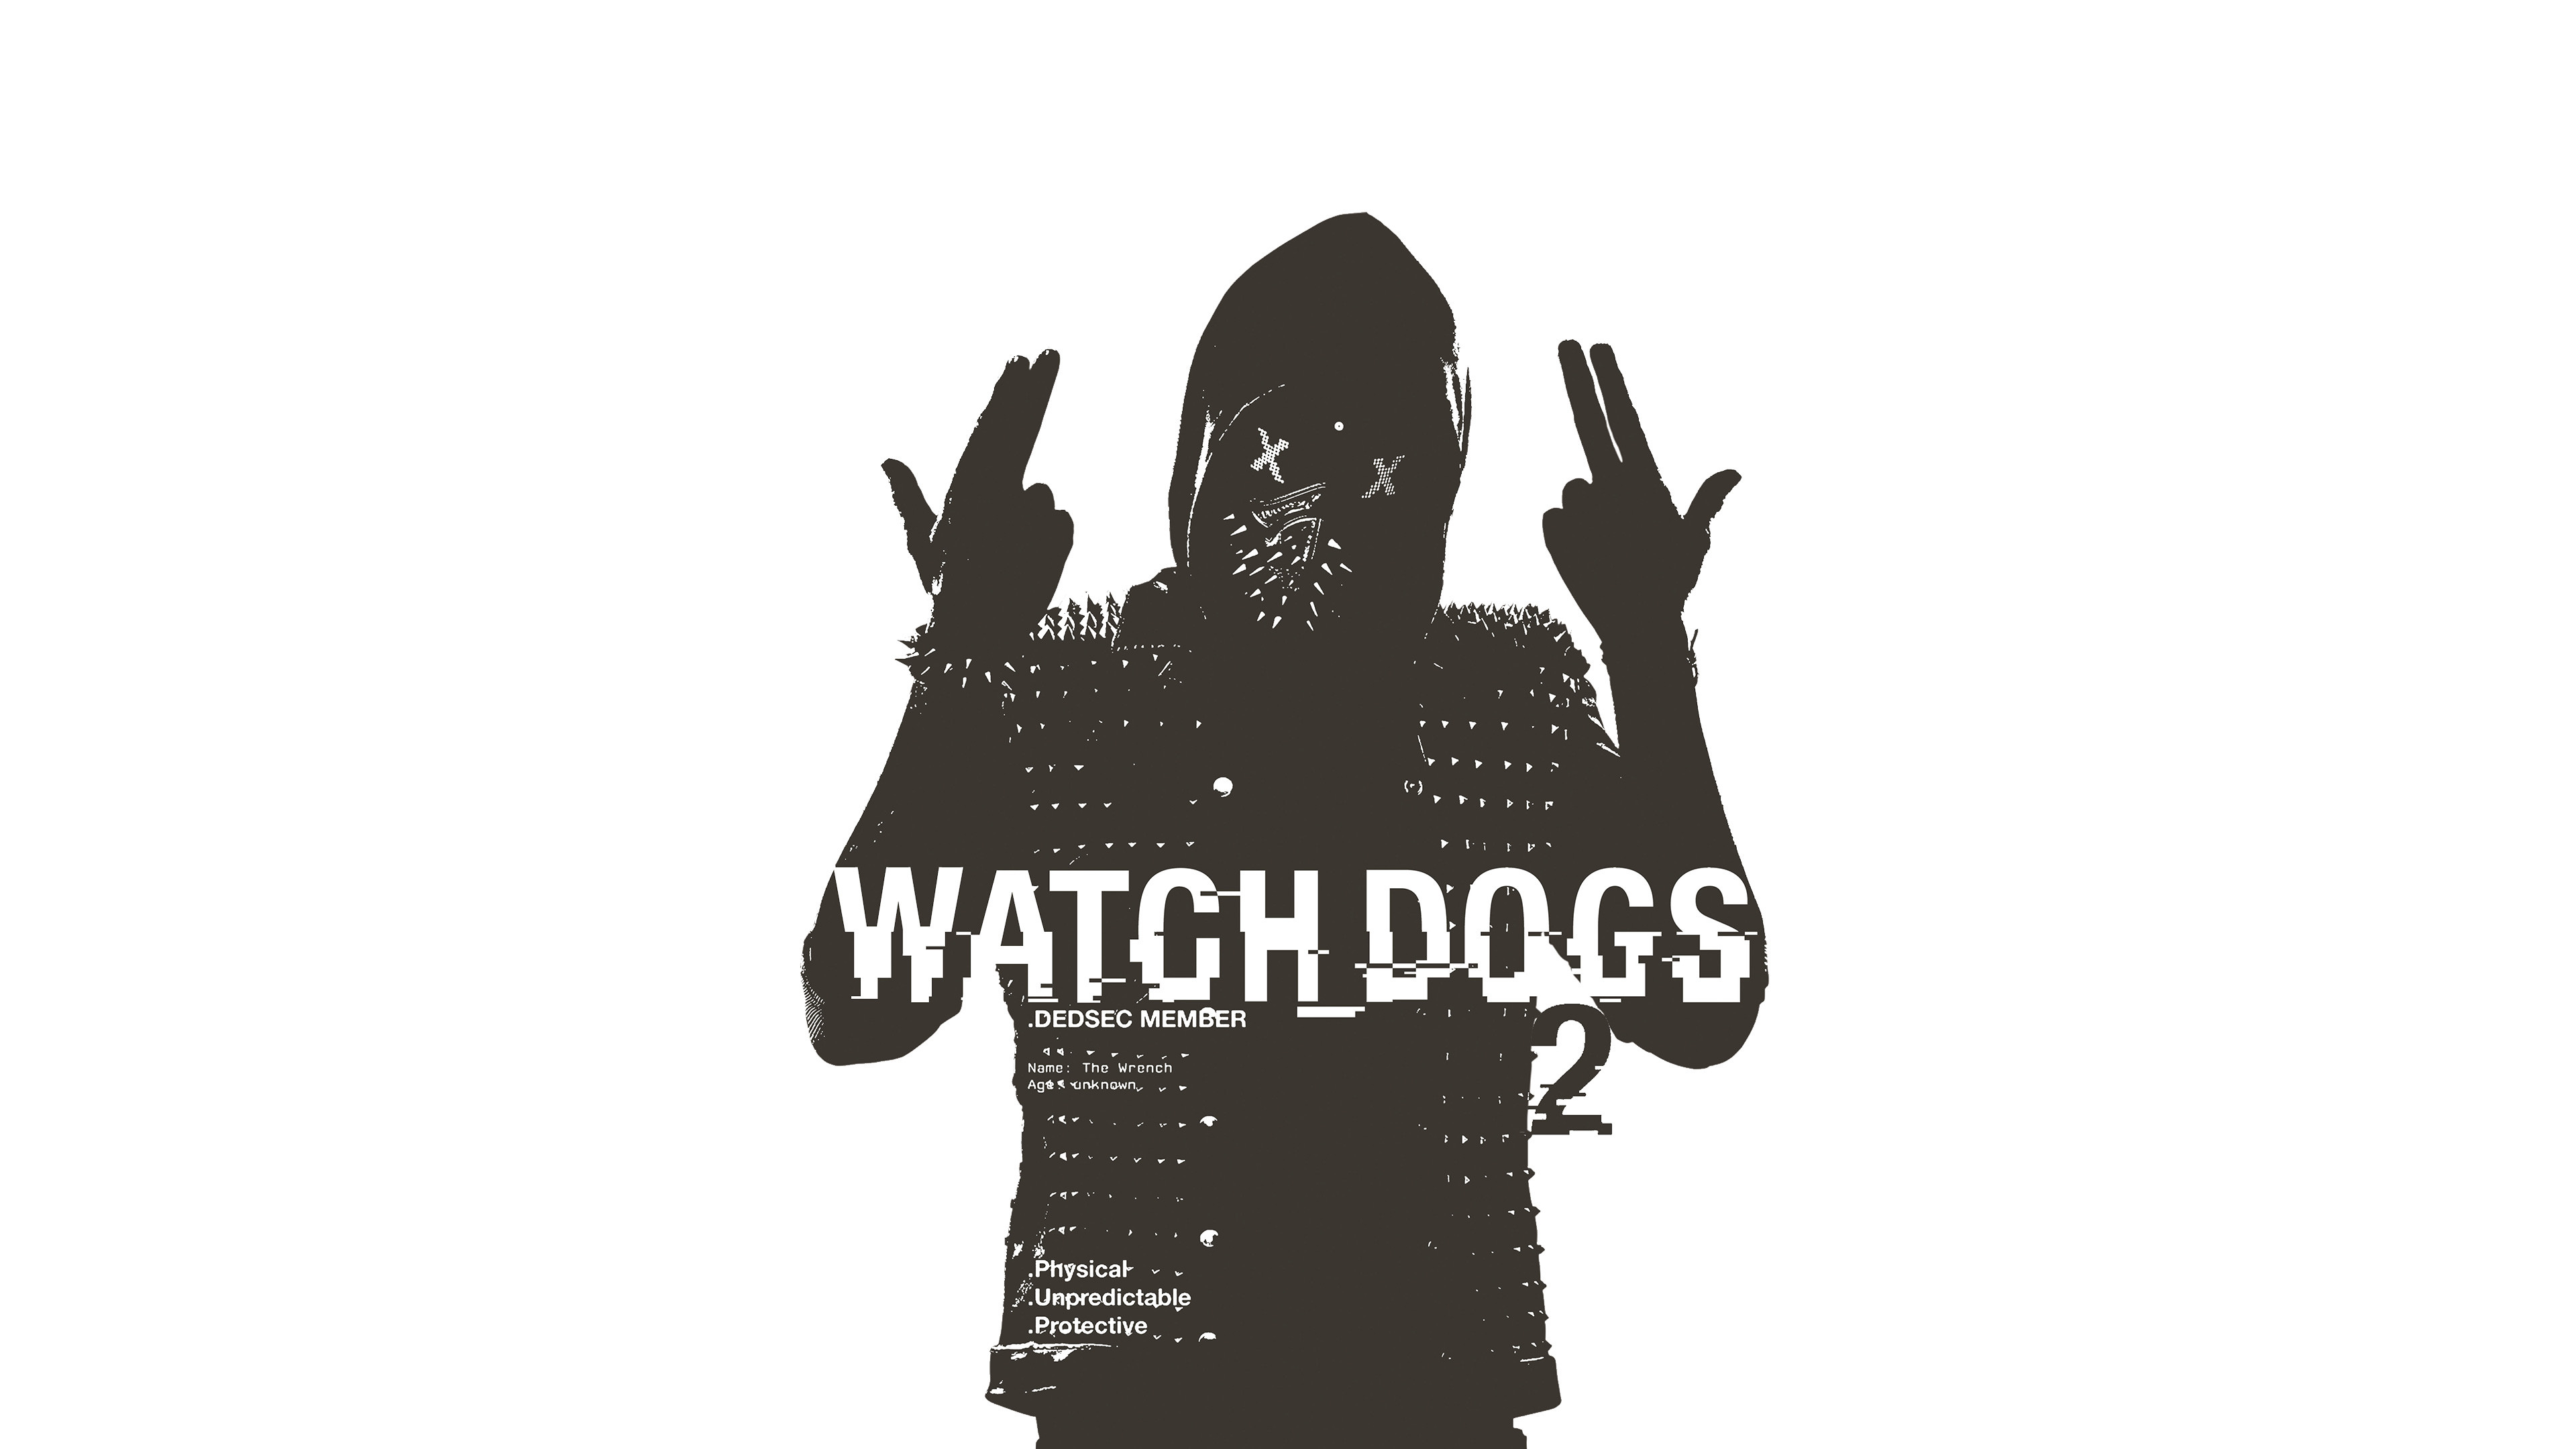 3840x2160 Watch Dogs 2 Wrench Poster